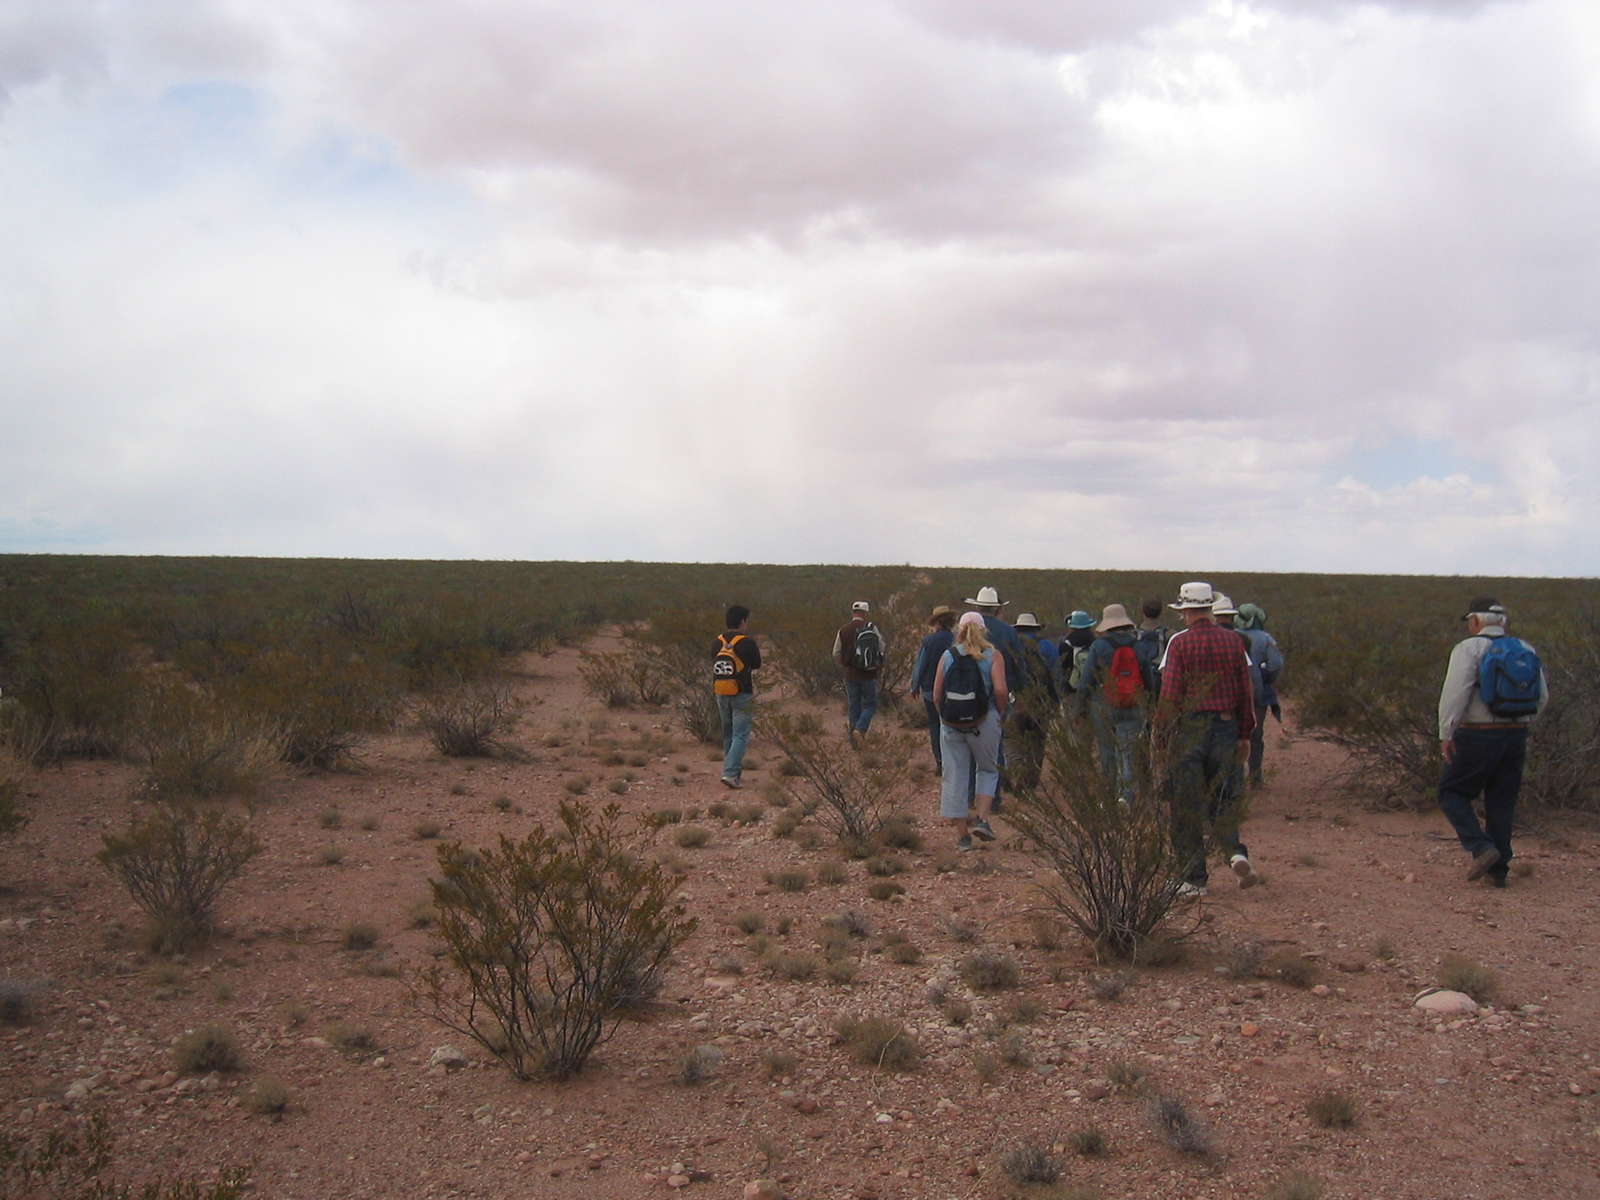 shrubby desert scene with people walking under a cloud-filled sky